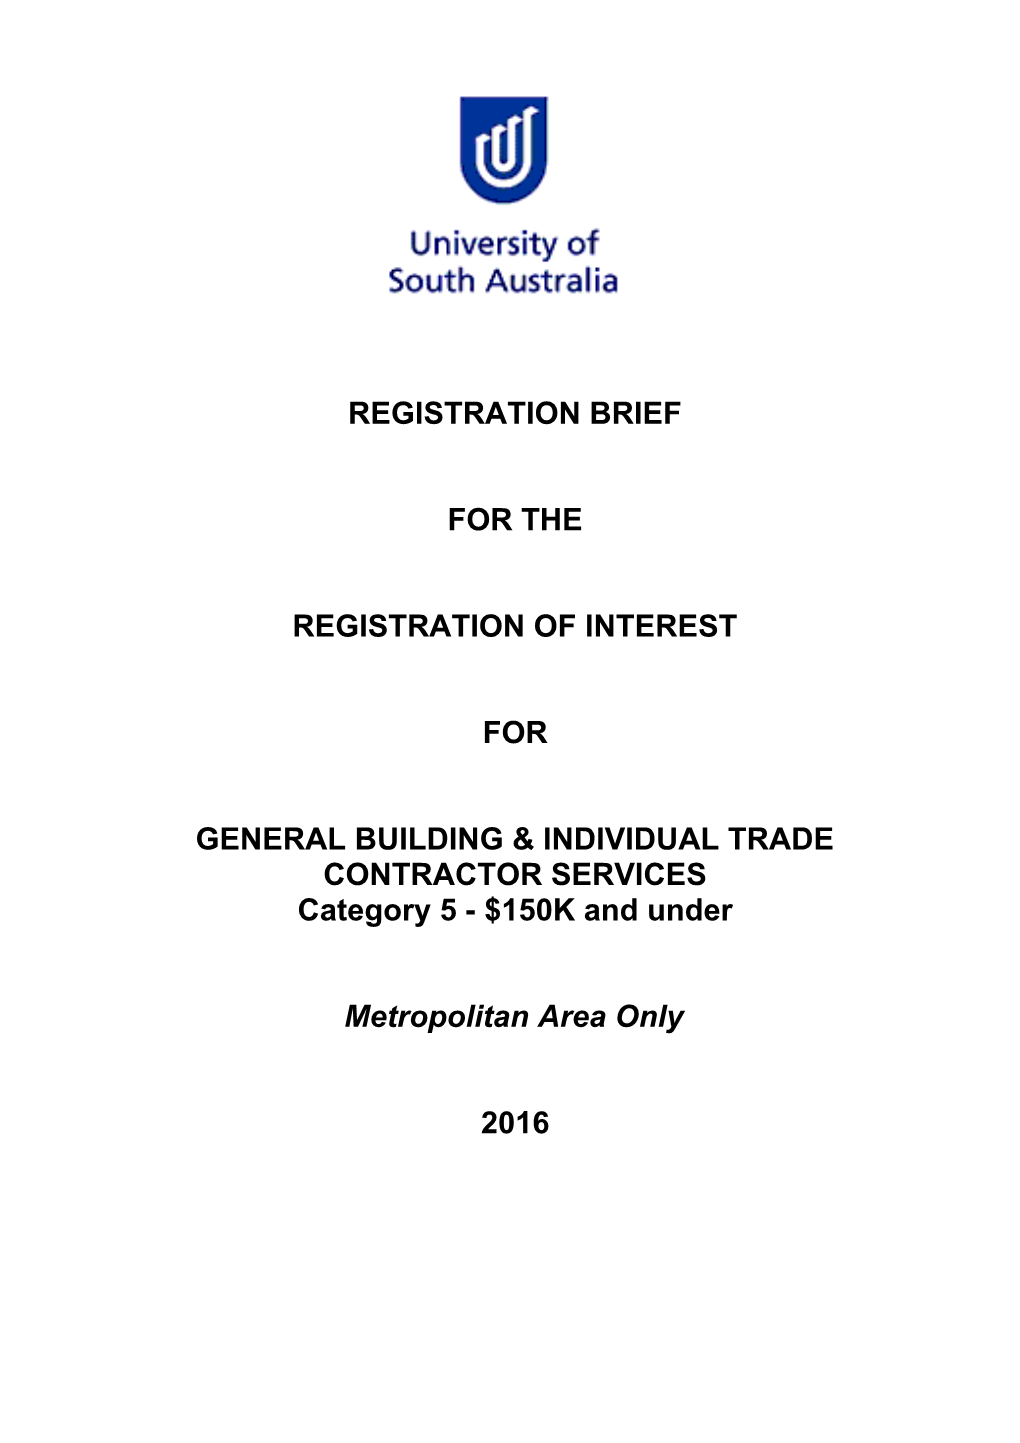 Registration of Interest for General Building Contractor Services Category 5